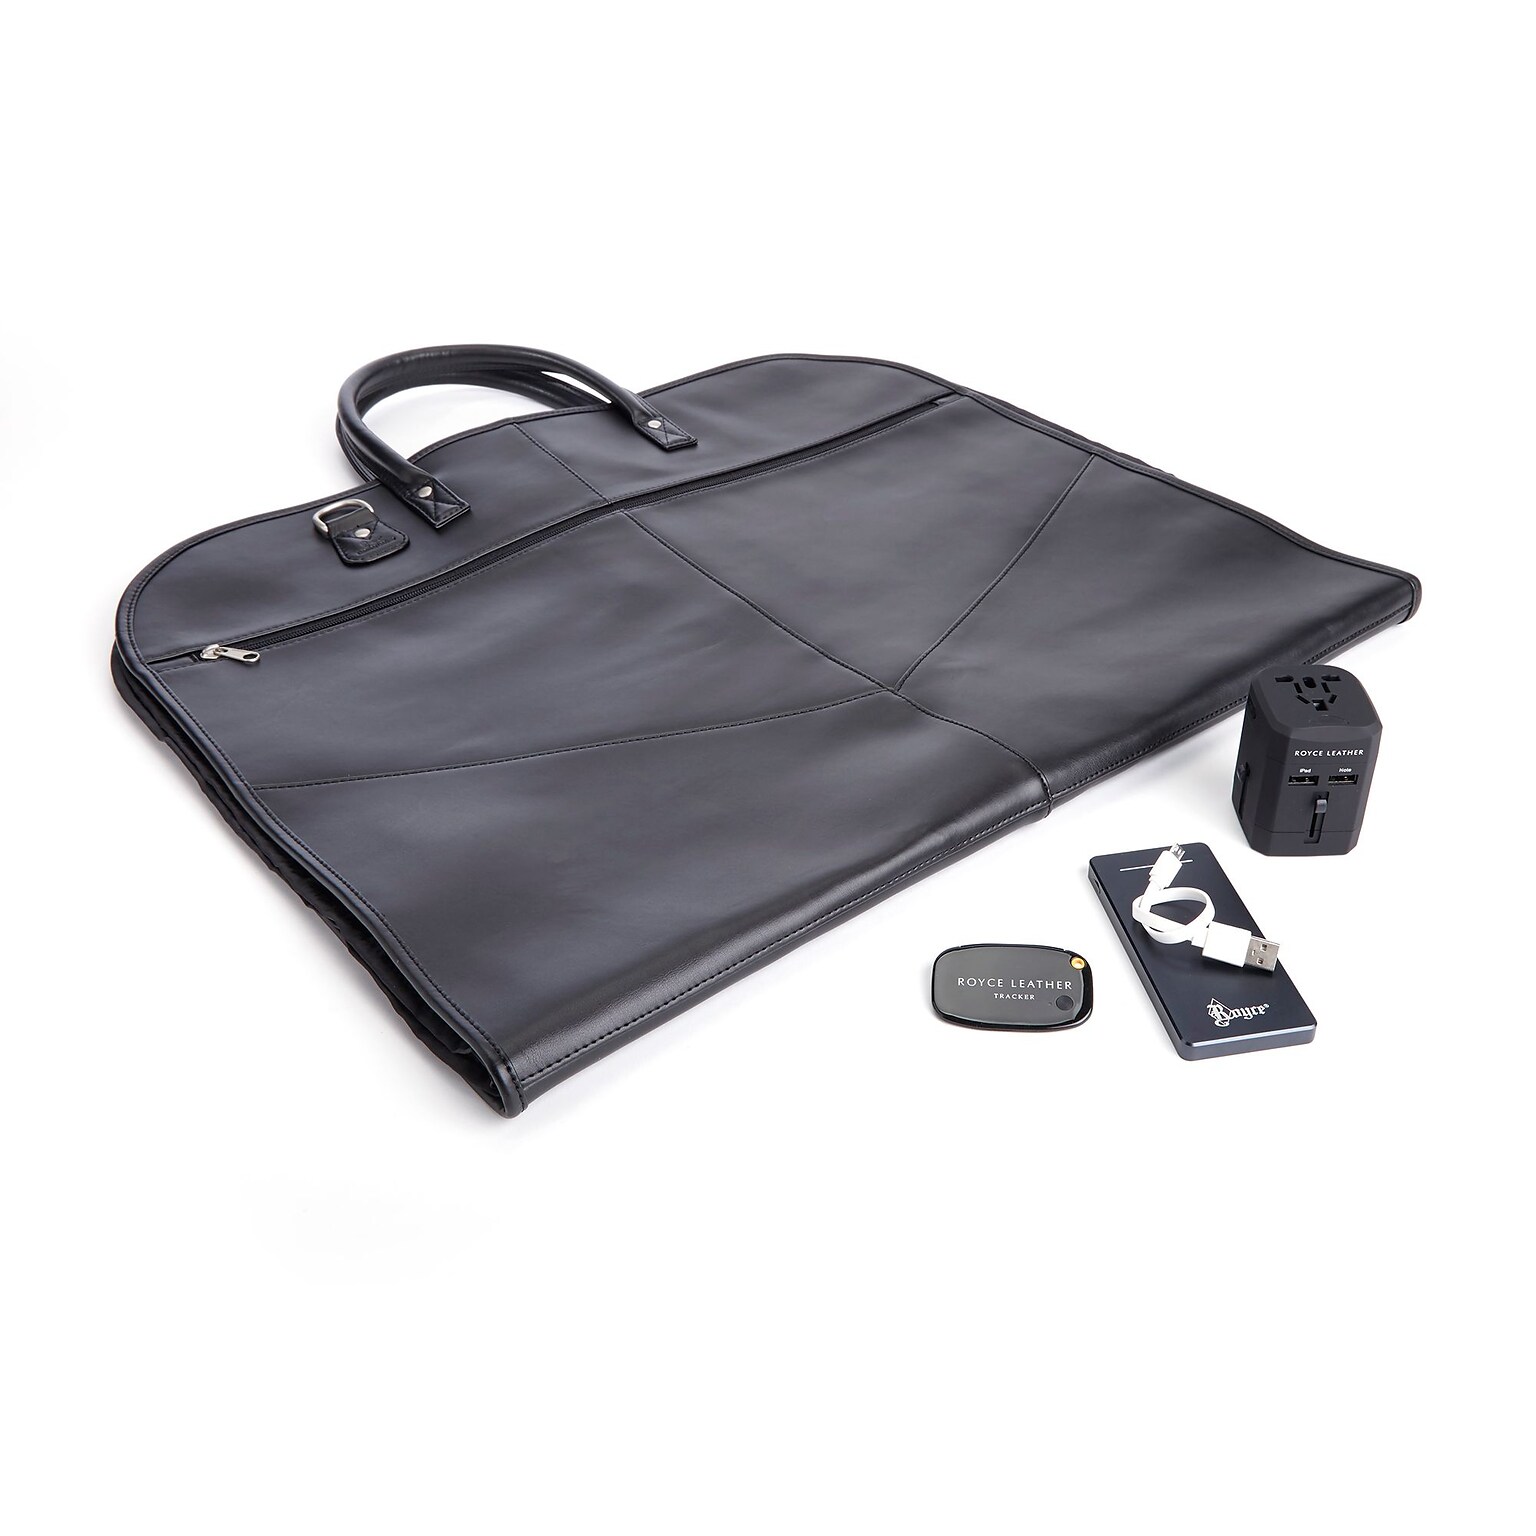 Royce Leather Leather Luxury Travel Set: Garment Bag with Bluetooth Tracking, Portable Power Bank, & International Adapter